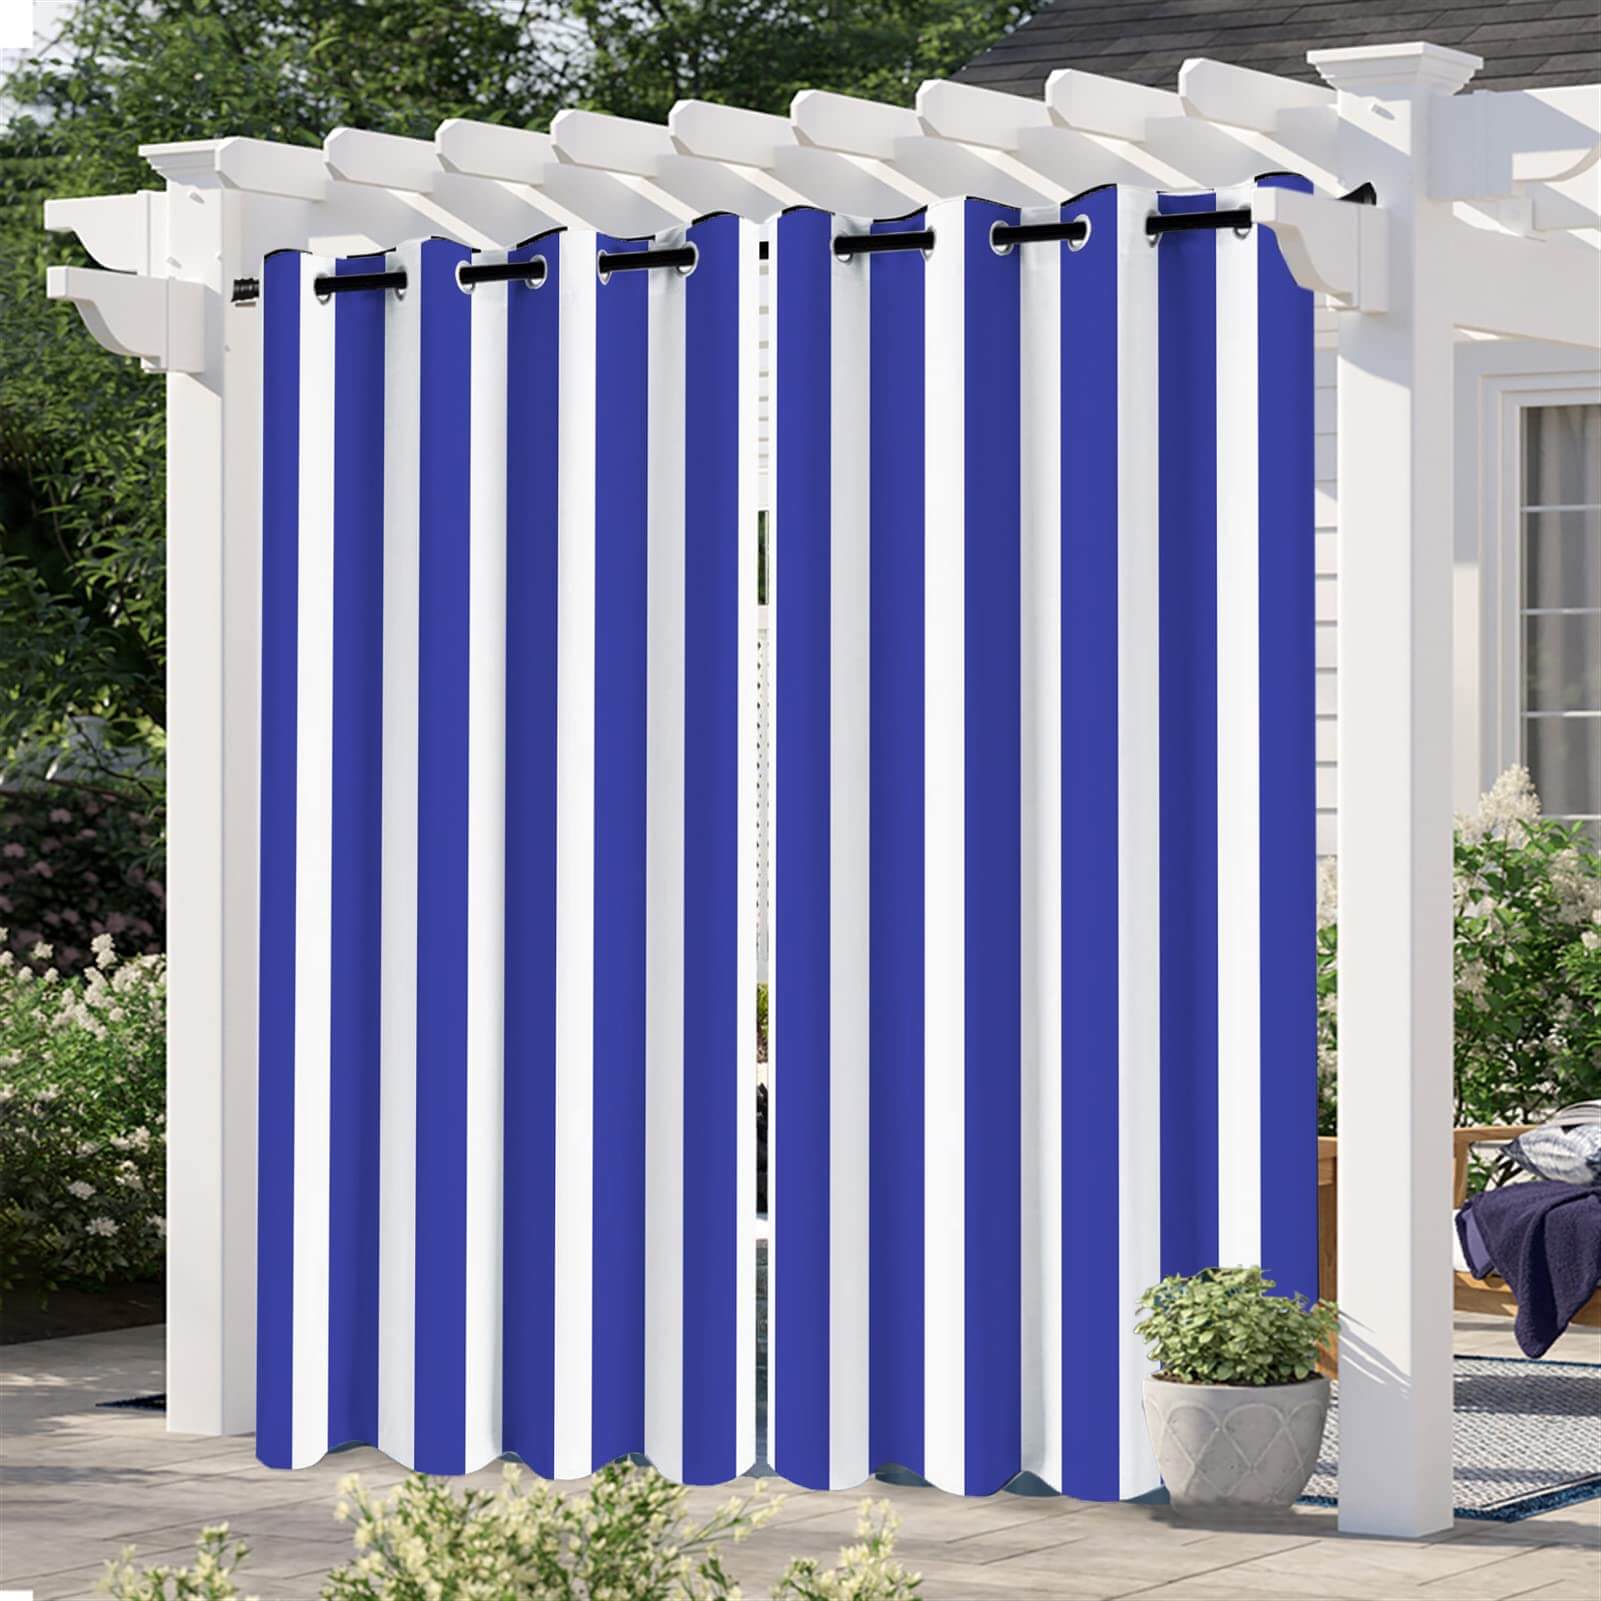 Blue Stripe Curtains/Drapes 1 Panel | Waterproof Curtains Grommet Top & Bottom | Custom Outdoor Curtains